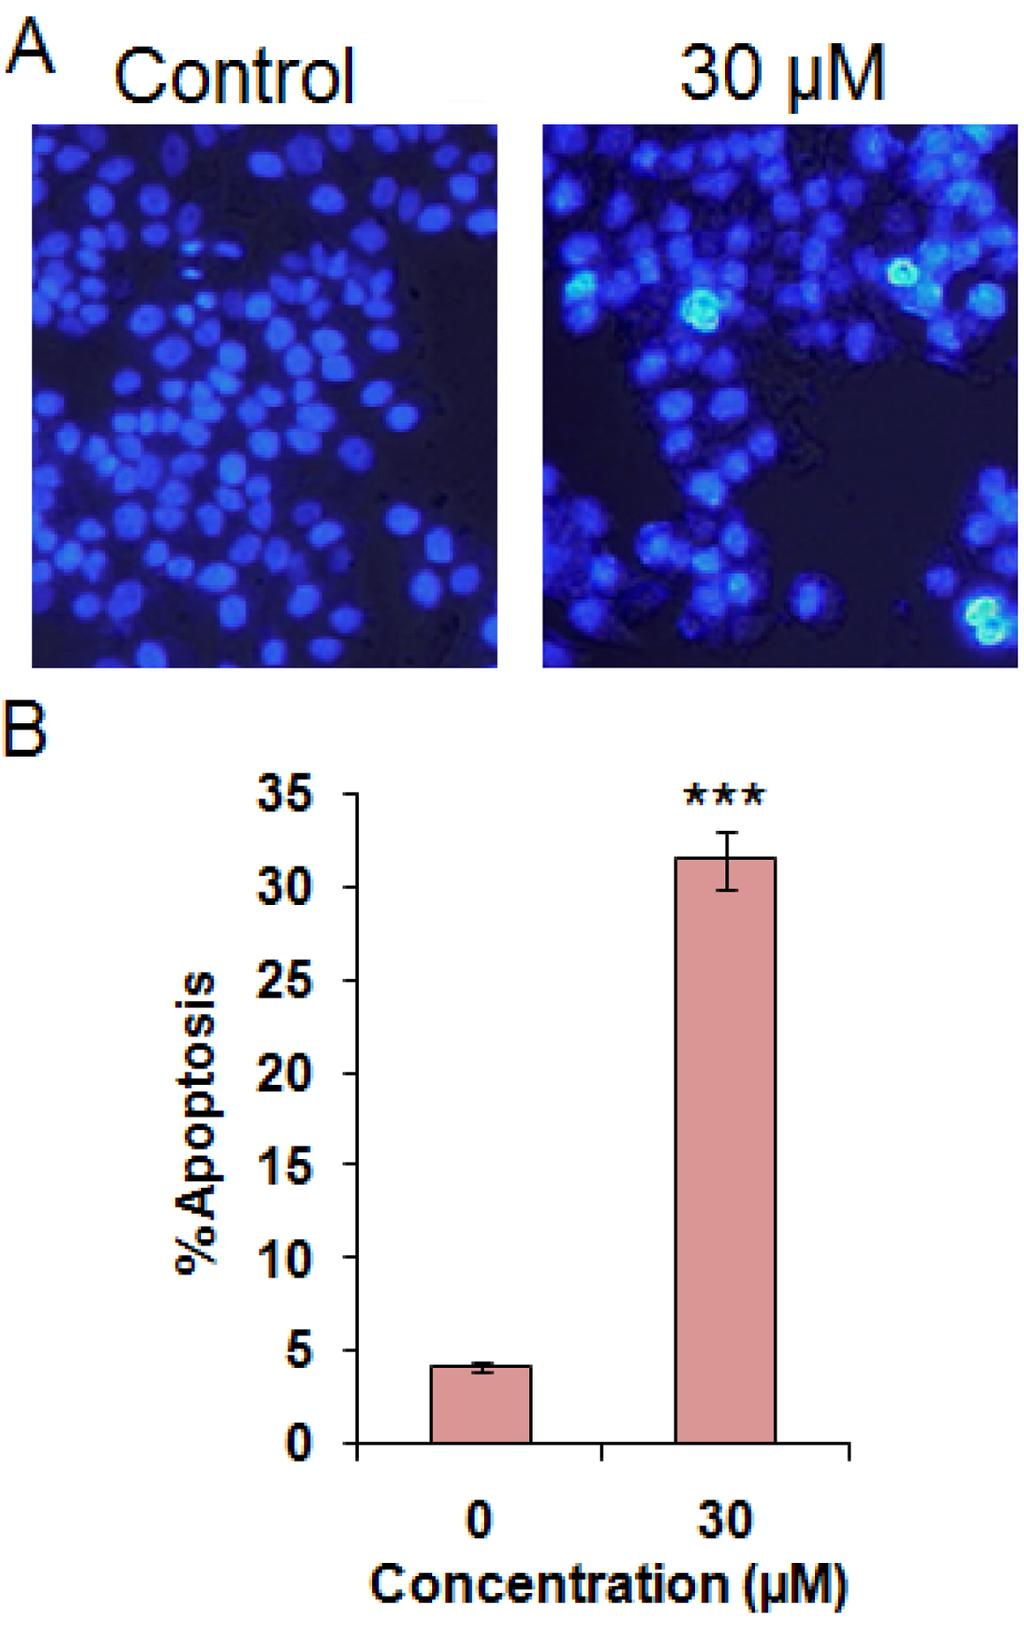 Figure 4. Induction of apoptosis in Colo-205 cells at IC50 concentrations of geraniol as indicated by (A) DAPI staining and (B) quantification of % apoptotic cells.